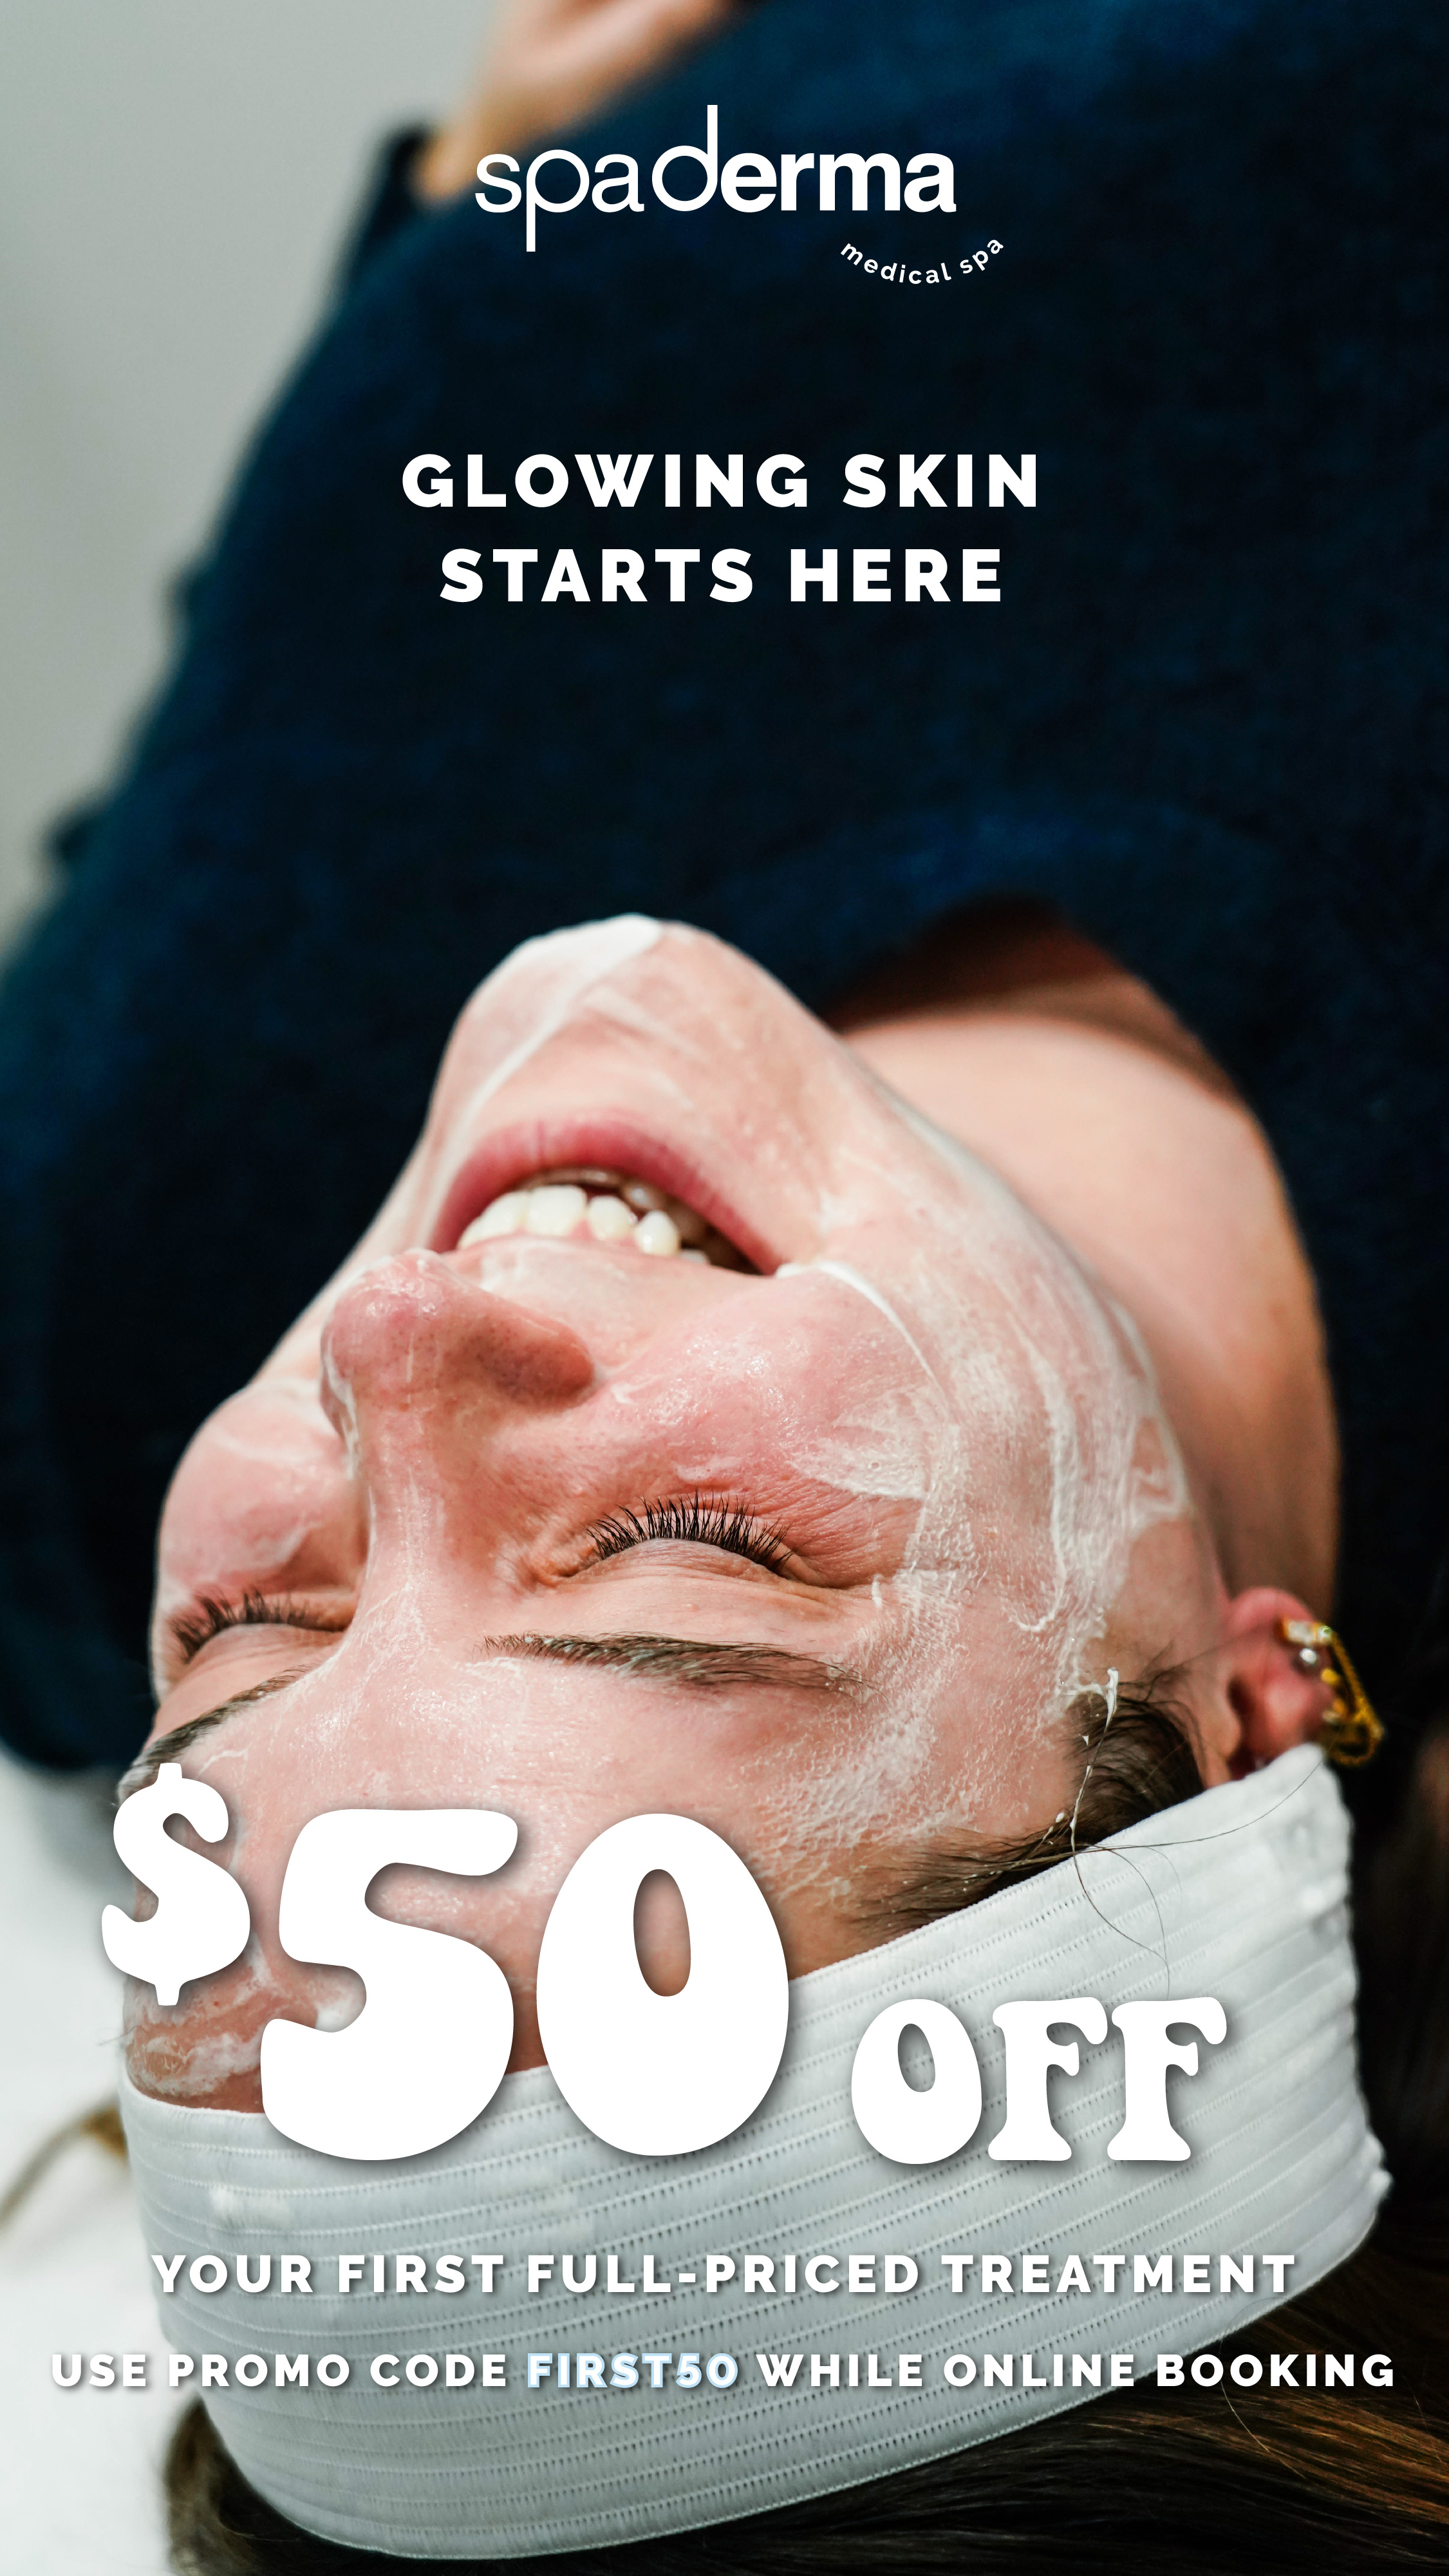 New to SpaDerma? Receive $50 off of your first full priced treatment! Use code FIRST25 when booking online!